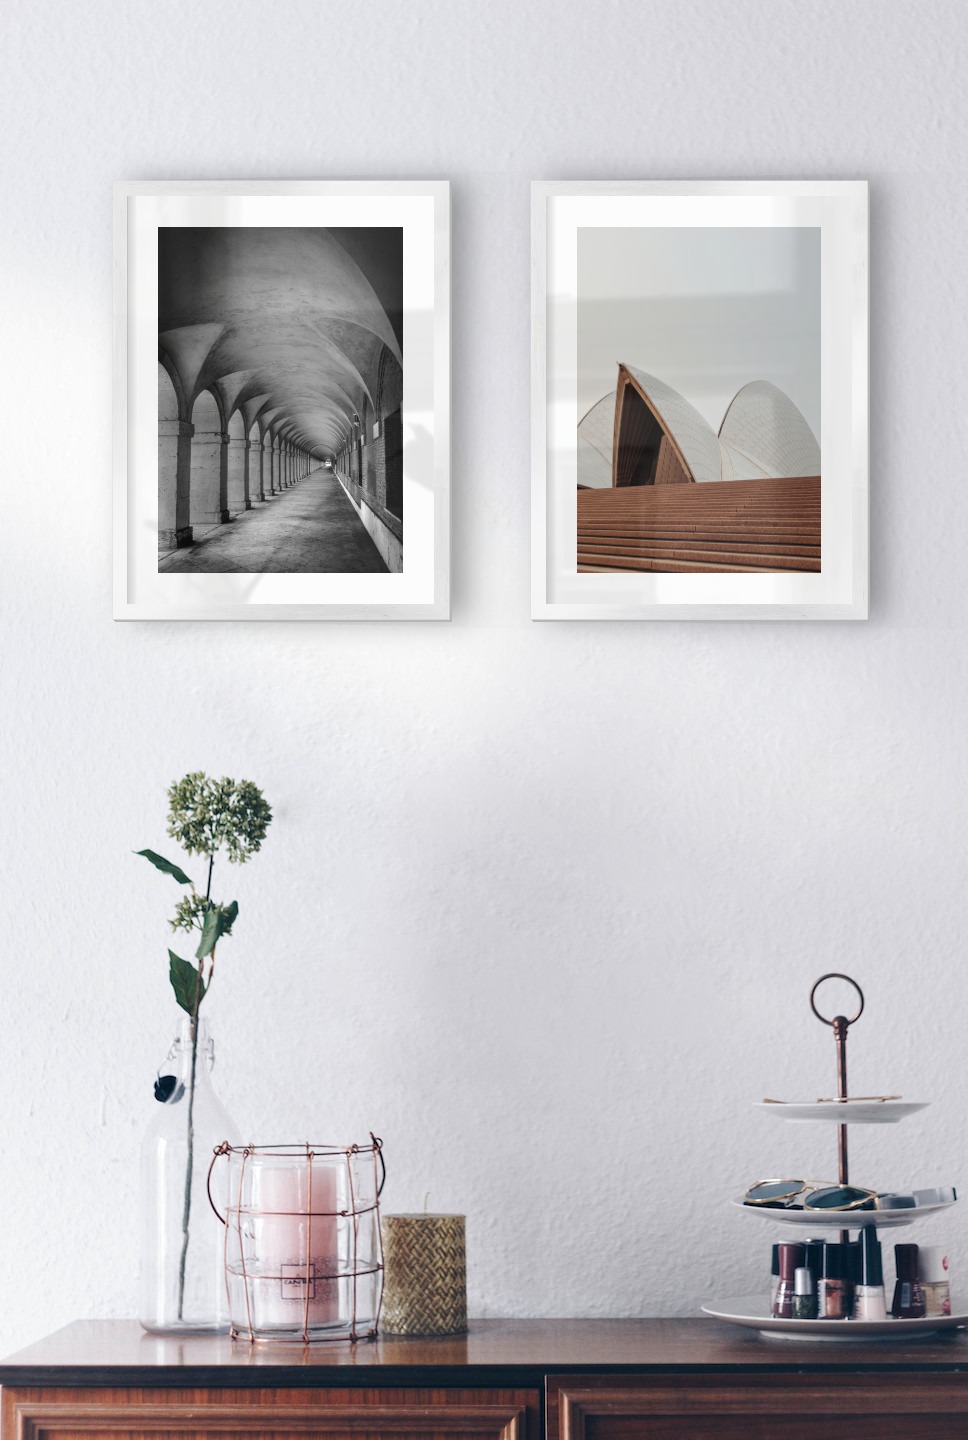 Gallery wall with picture frames in silver in sizes 30x40 with prints "Hallway with pillars and arches" and "Sydney Opera House"